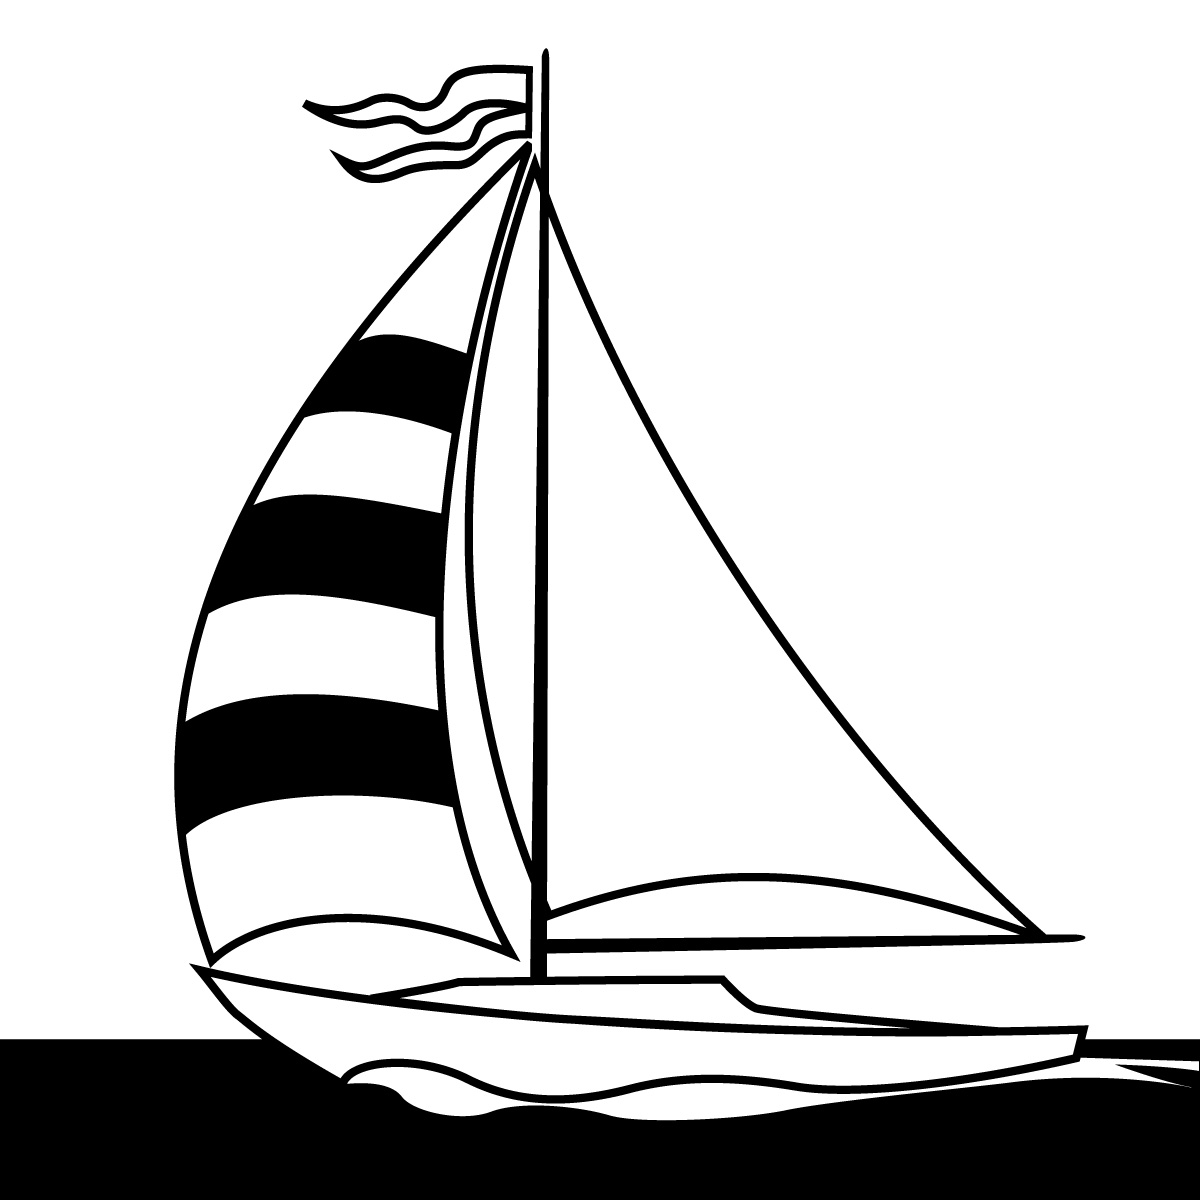 Sailboat Template For Kids - ClipArt Best